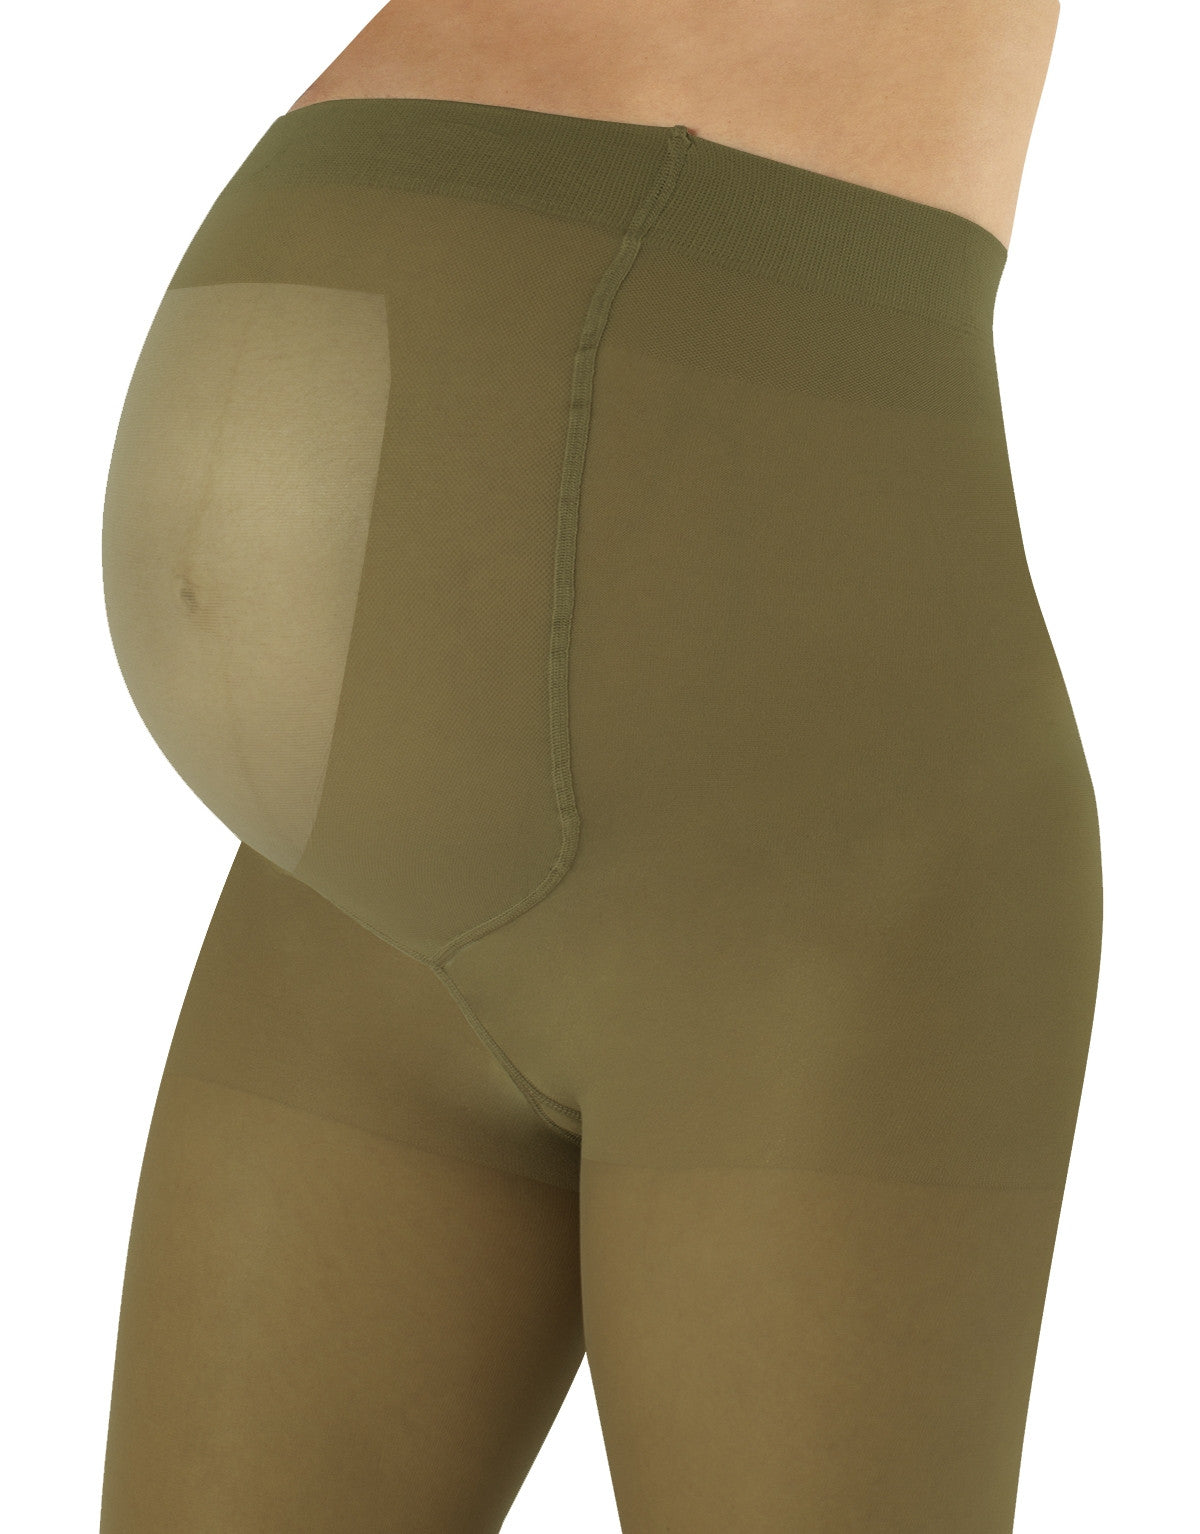 Calzitaly 100 Den Maternity Tights - Khaki olive green ultra opaque pregnancy tights with an extra panel and flat seam.